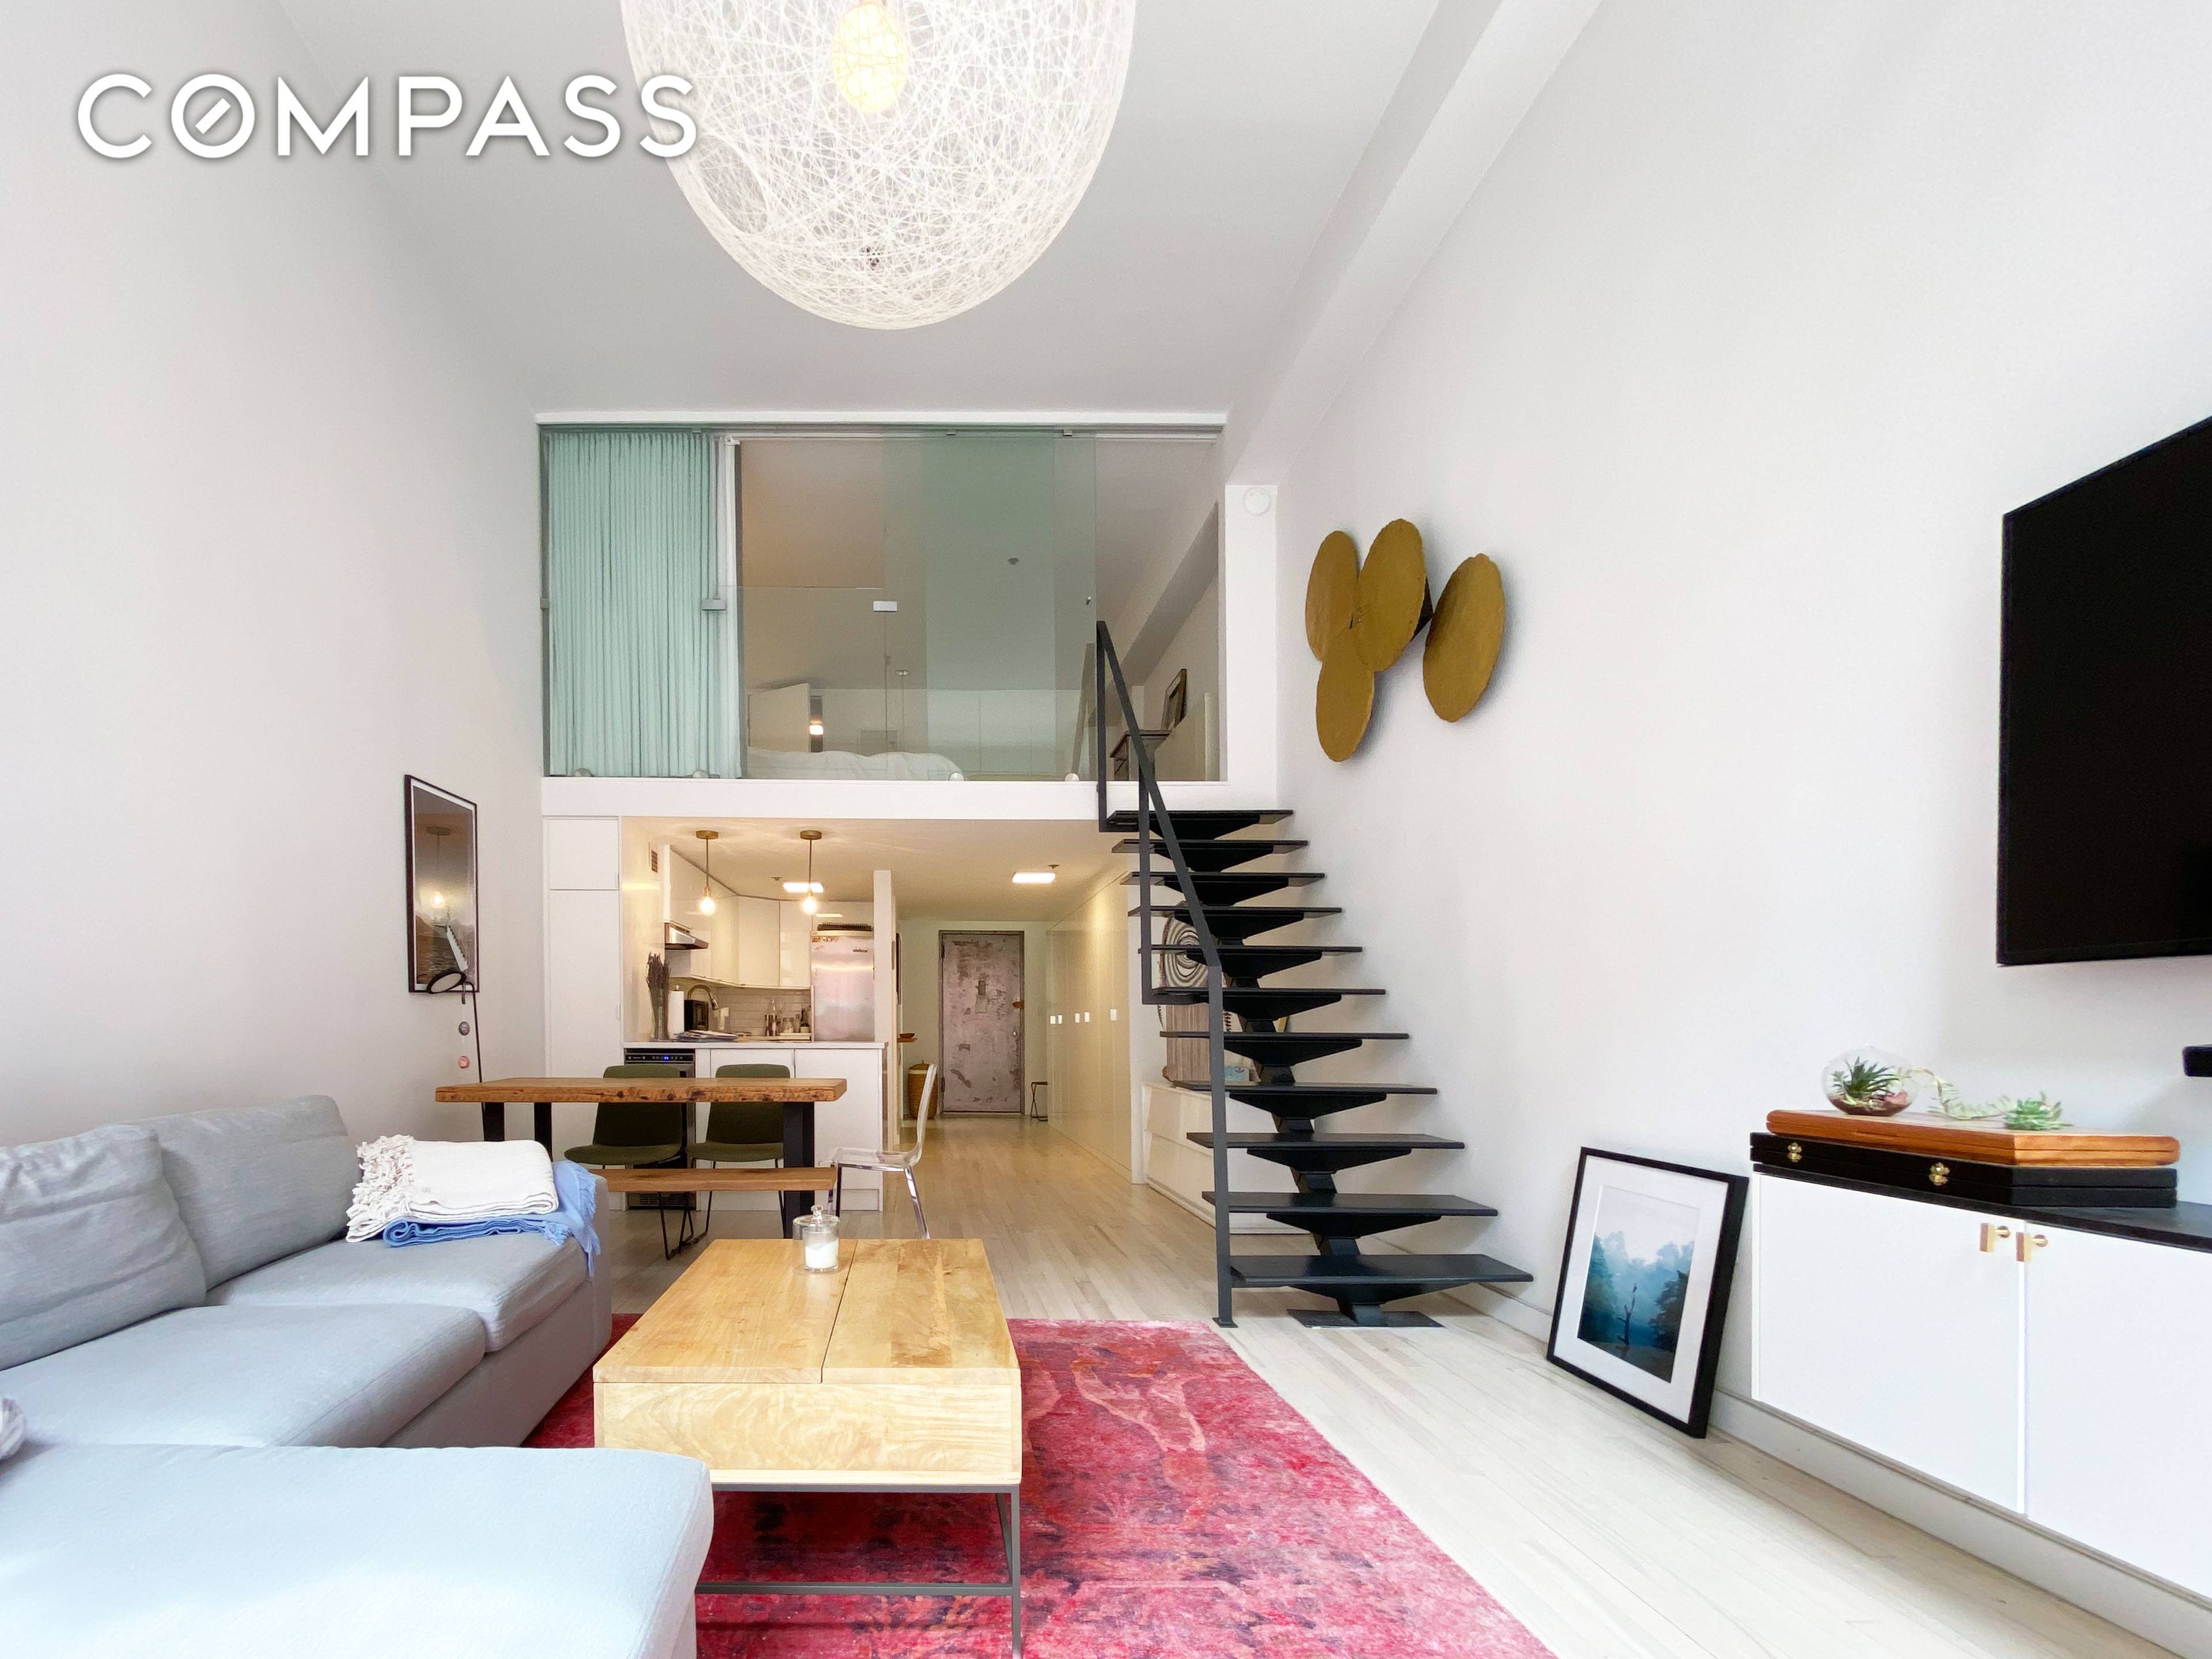 This pre war duplex Loft offers 16 ft ceilings, oversized south facing windows with an abundant amount of sunlight, a tastefully renovated kitchen with a breakfast bar, a floating staircase, ...